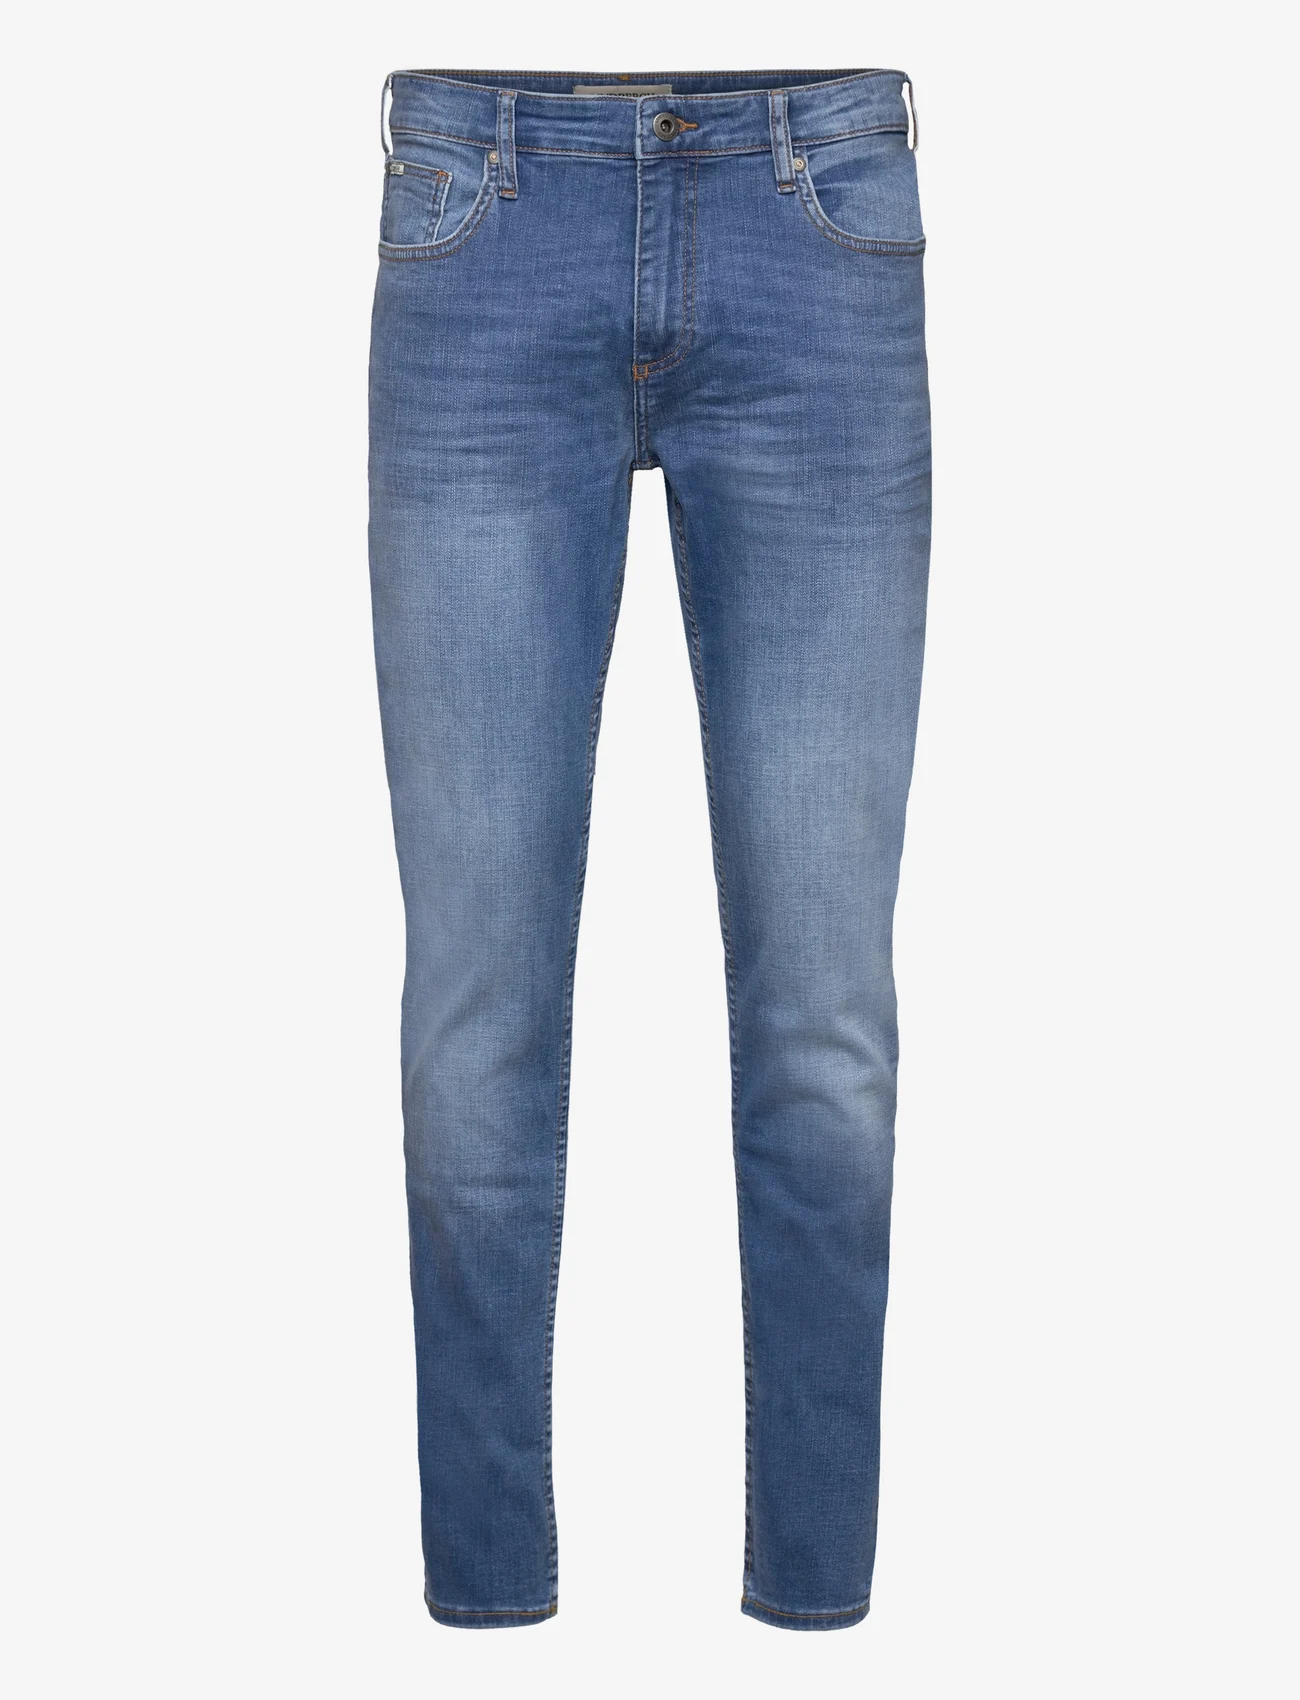 Lindbergh - Superflex Tapered Fit Jeans - nordic style - sun faded blue - 1